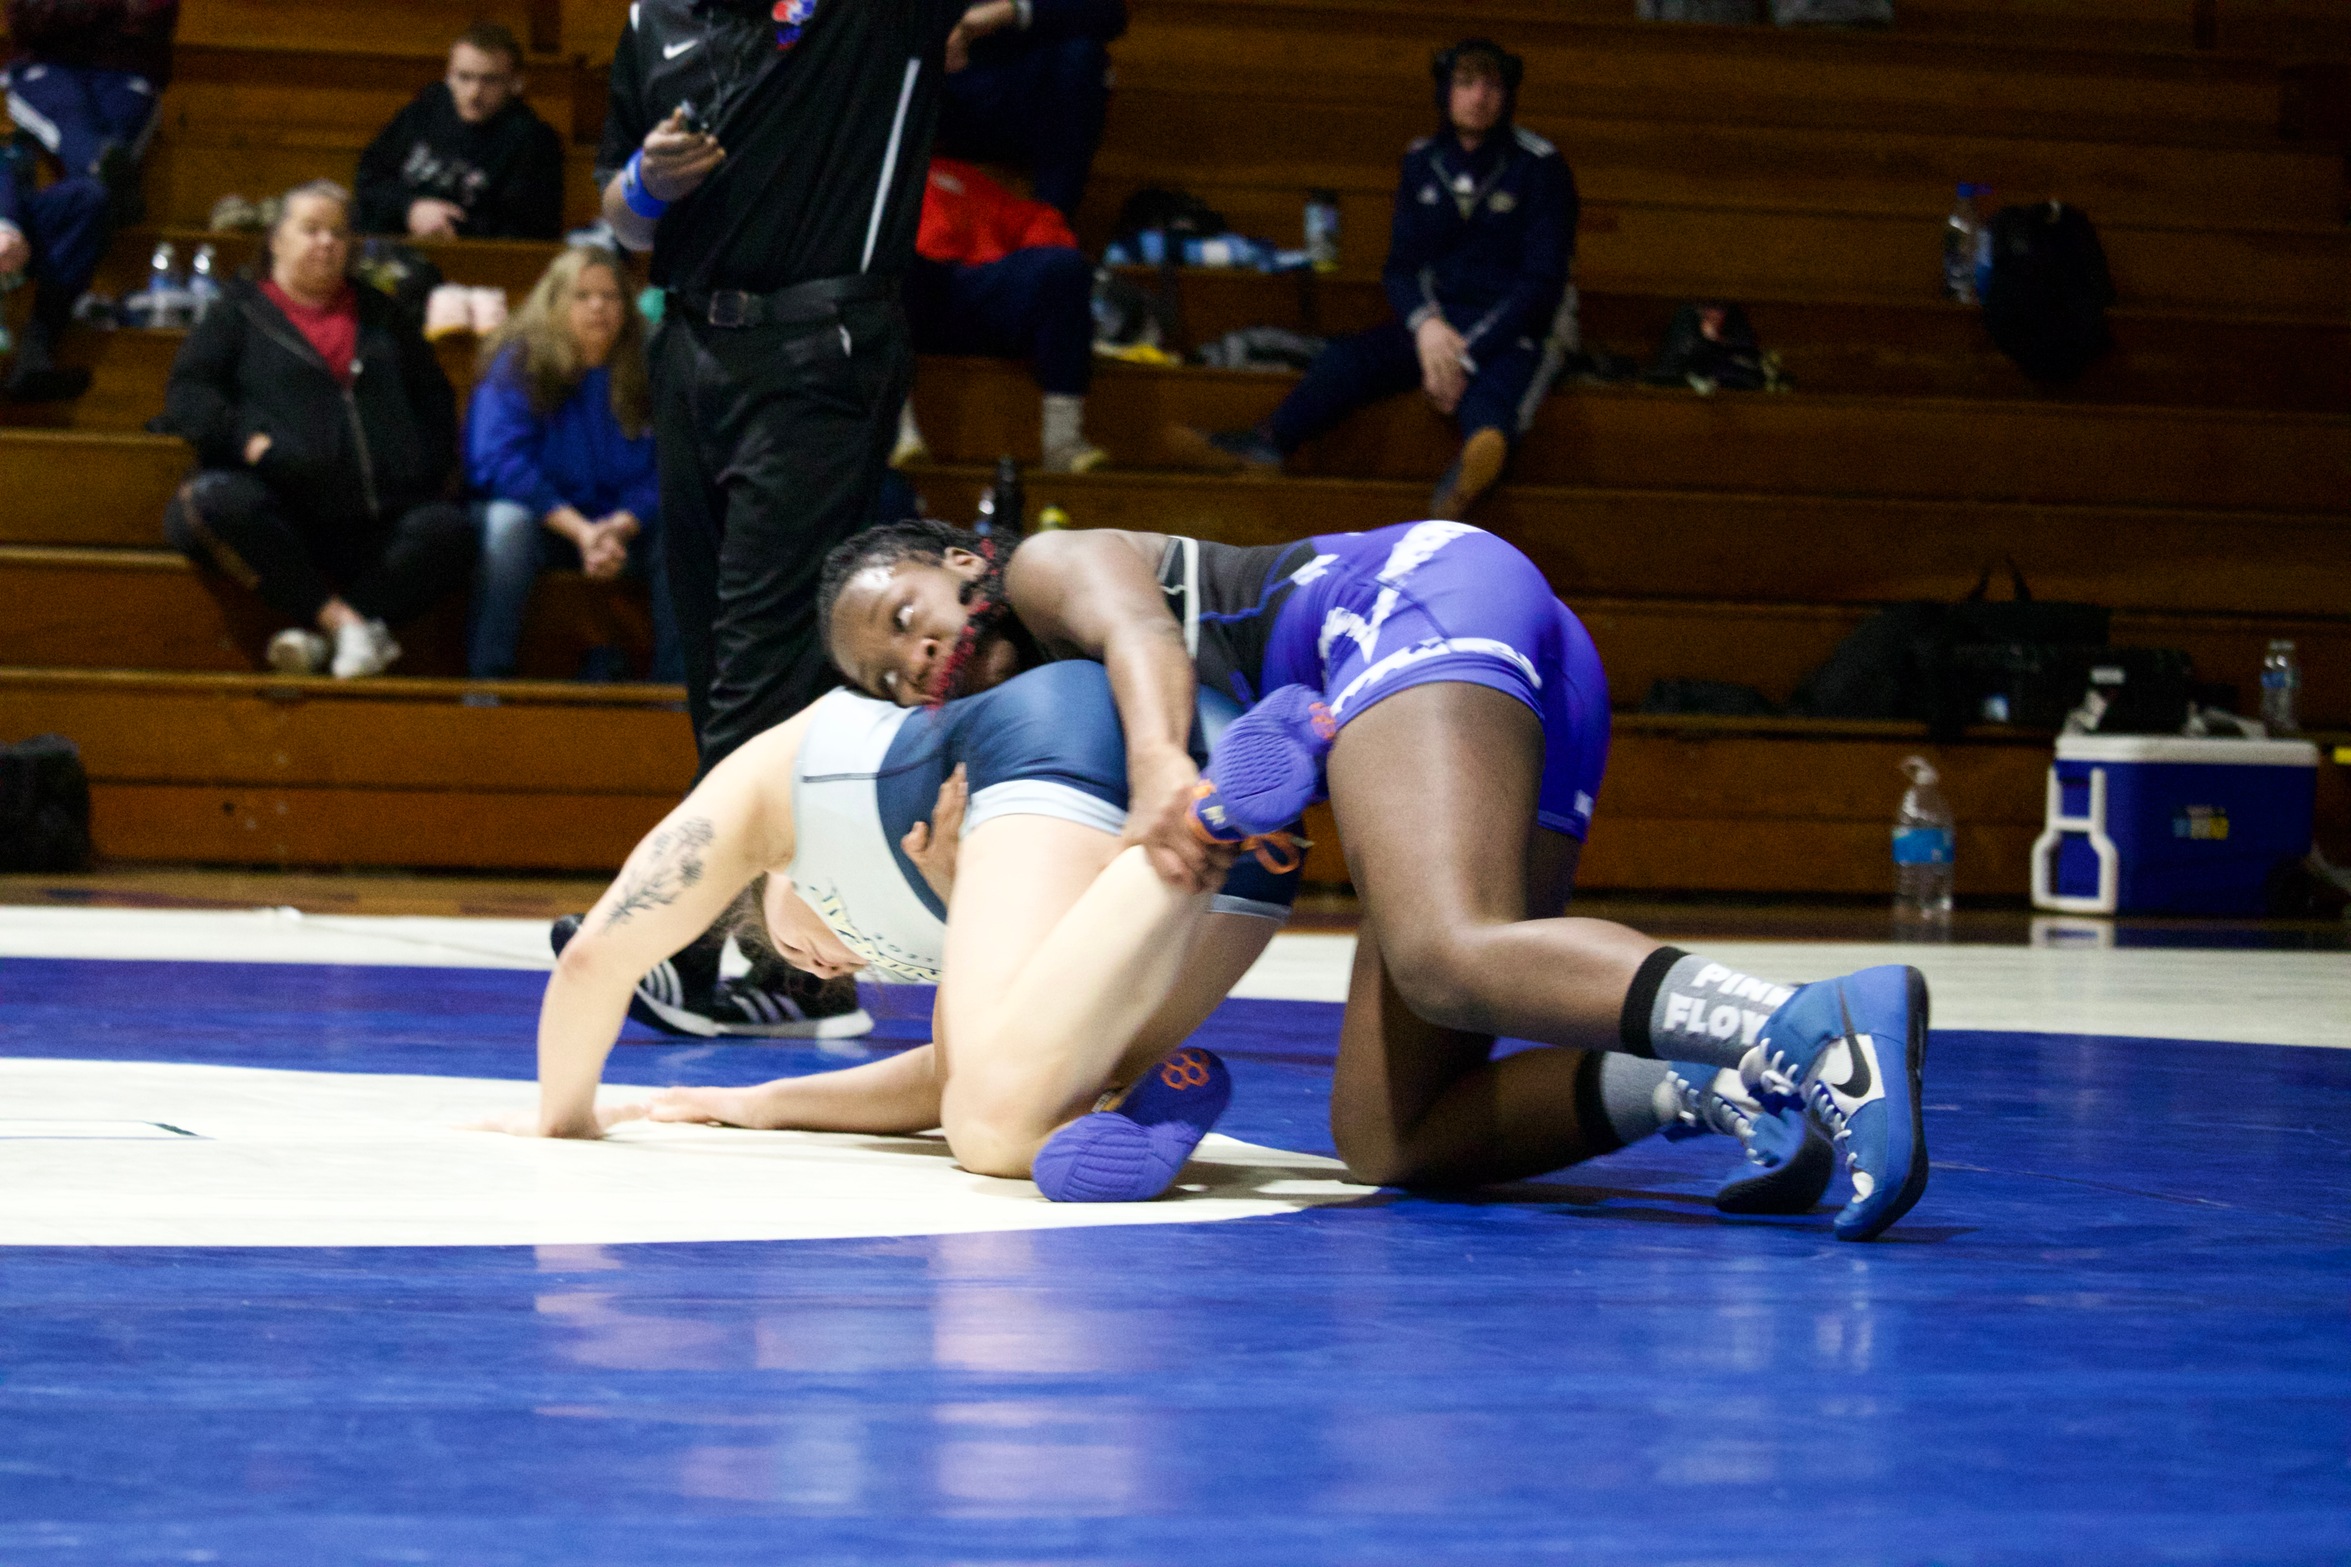 St. Andrews women's wrestling team scores victory over Montreat College, men suffer narrow loss